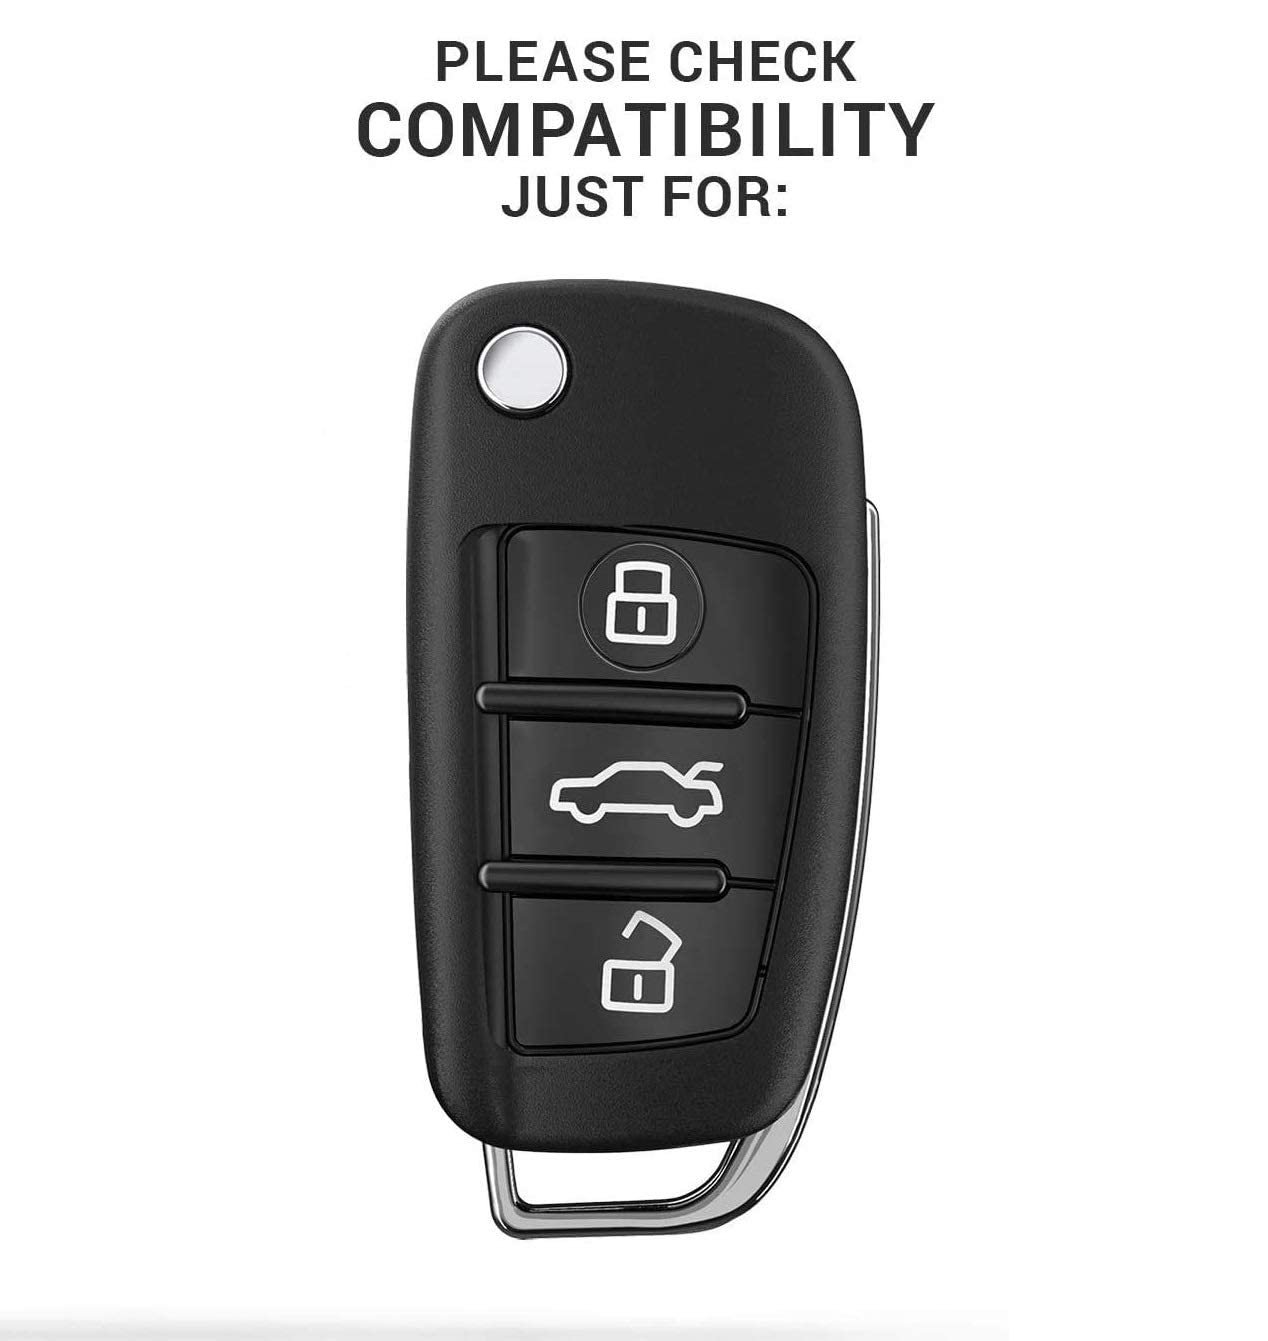 TPU Carbon Fiber Car Key Cover Compatible with Audi A1 A3 A6 Q2 Q3 Q7 TT TTS R8 S3 S6 RS3 Flip Key (Black) Image 